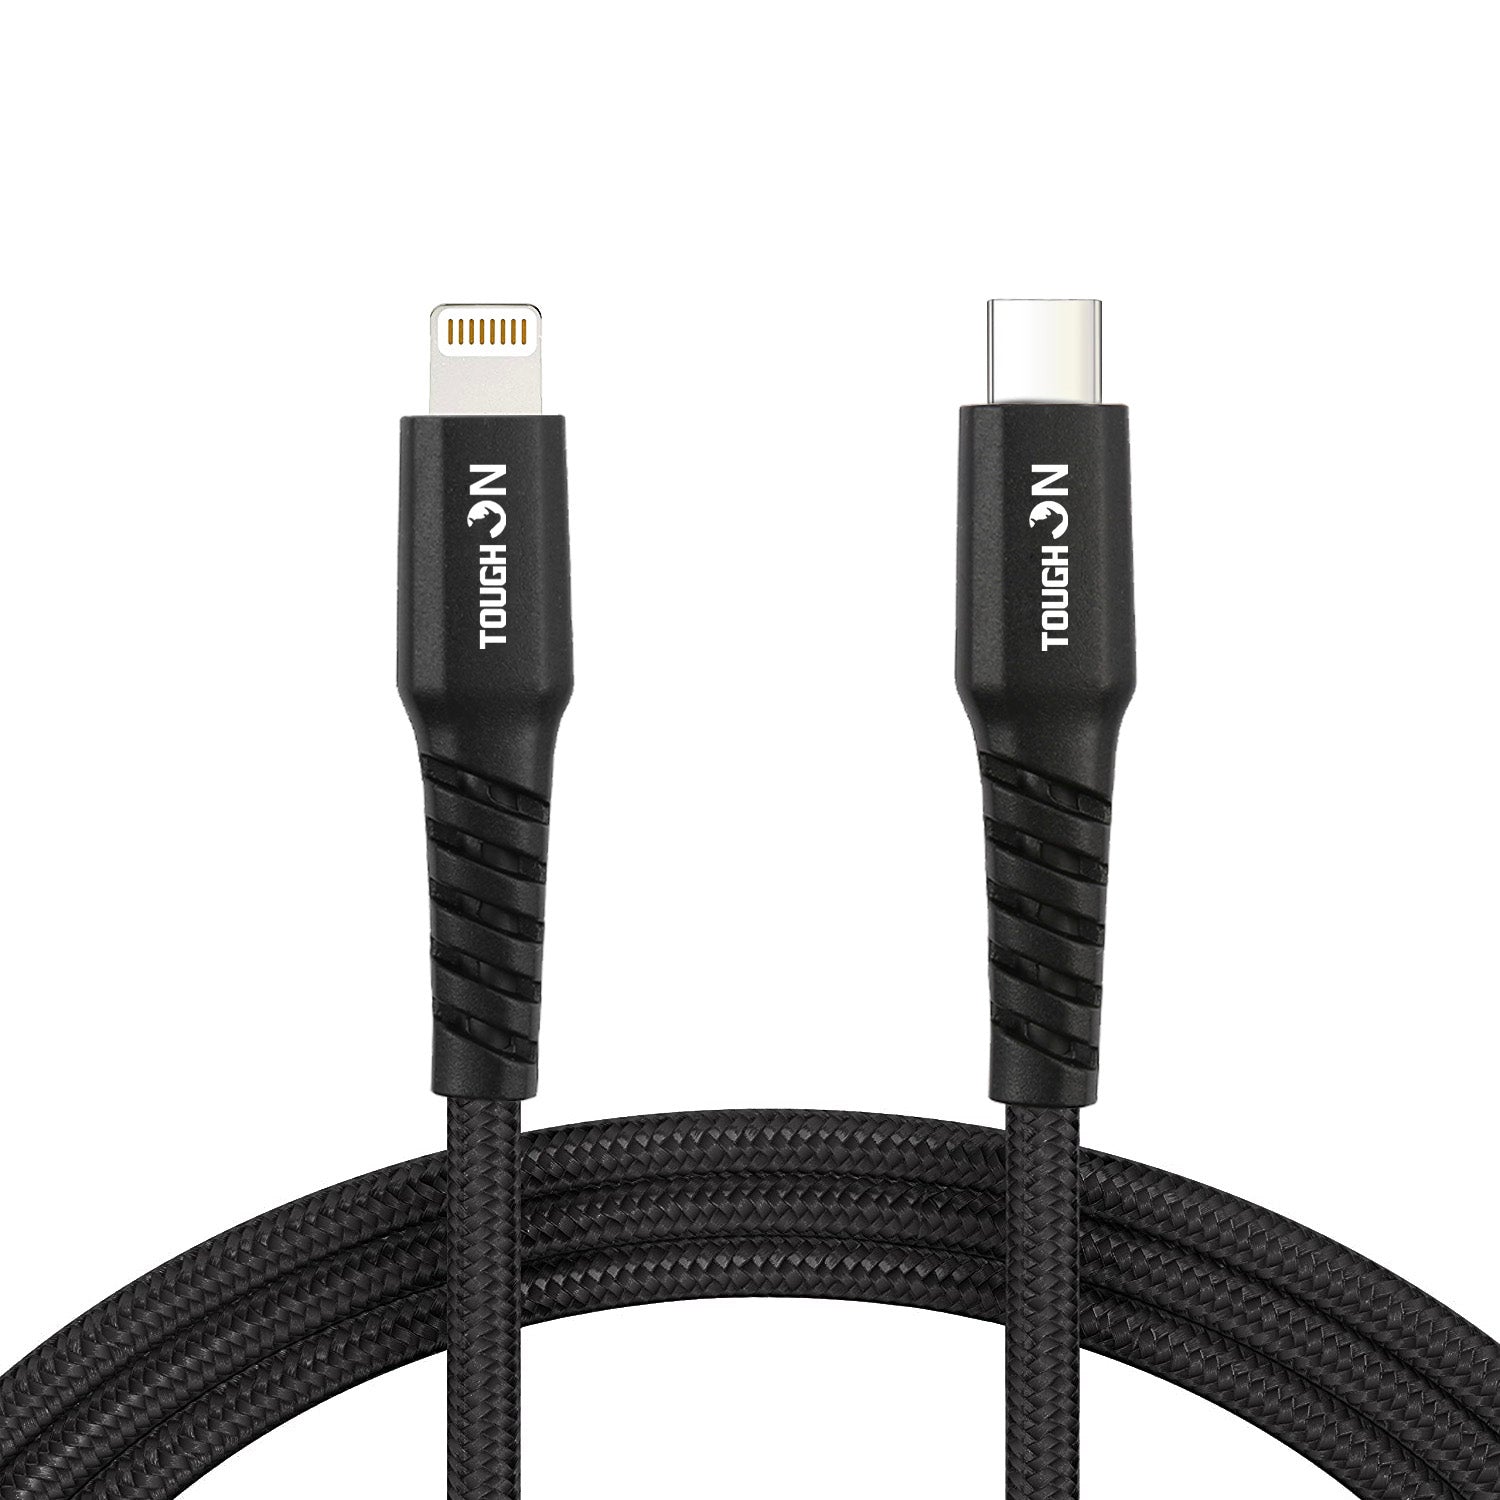 Tough on USB C to Lightning Cable 1m Black for iPhone & iPad Apple MFi Certified